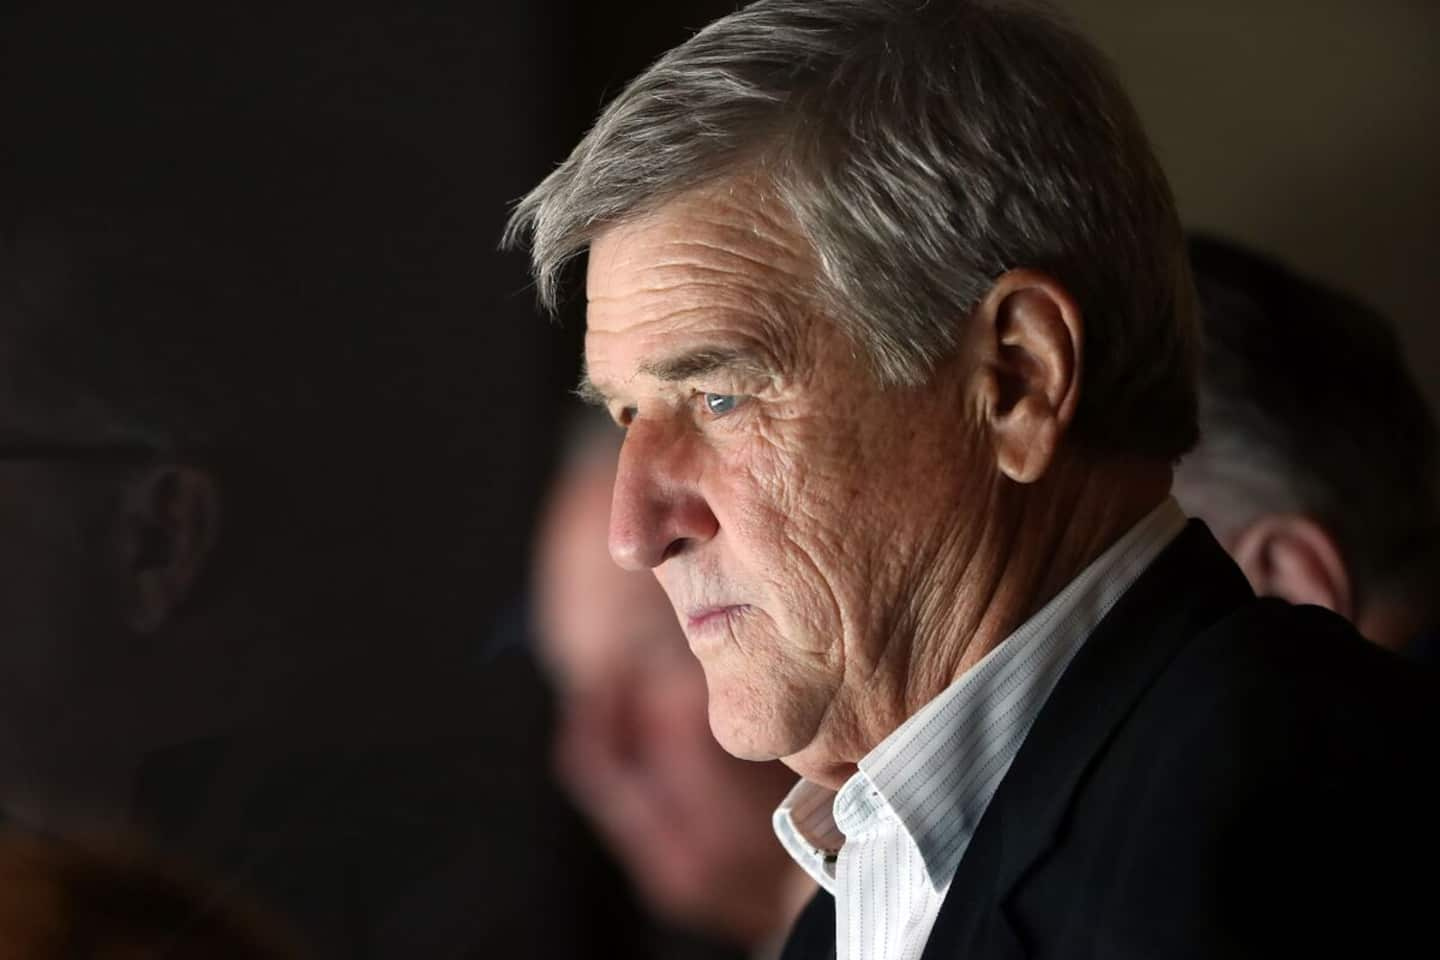 Winter Classic: Bobby Orr will perform the “ceremonial throw”